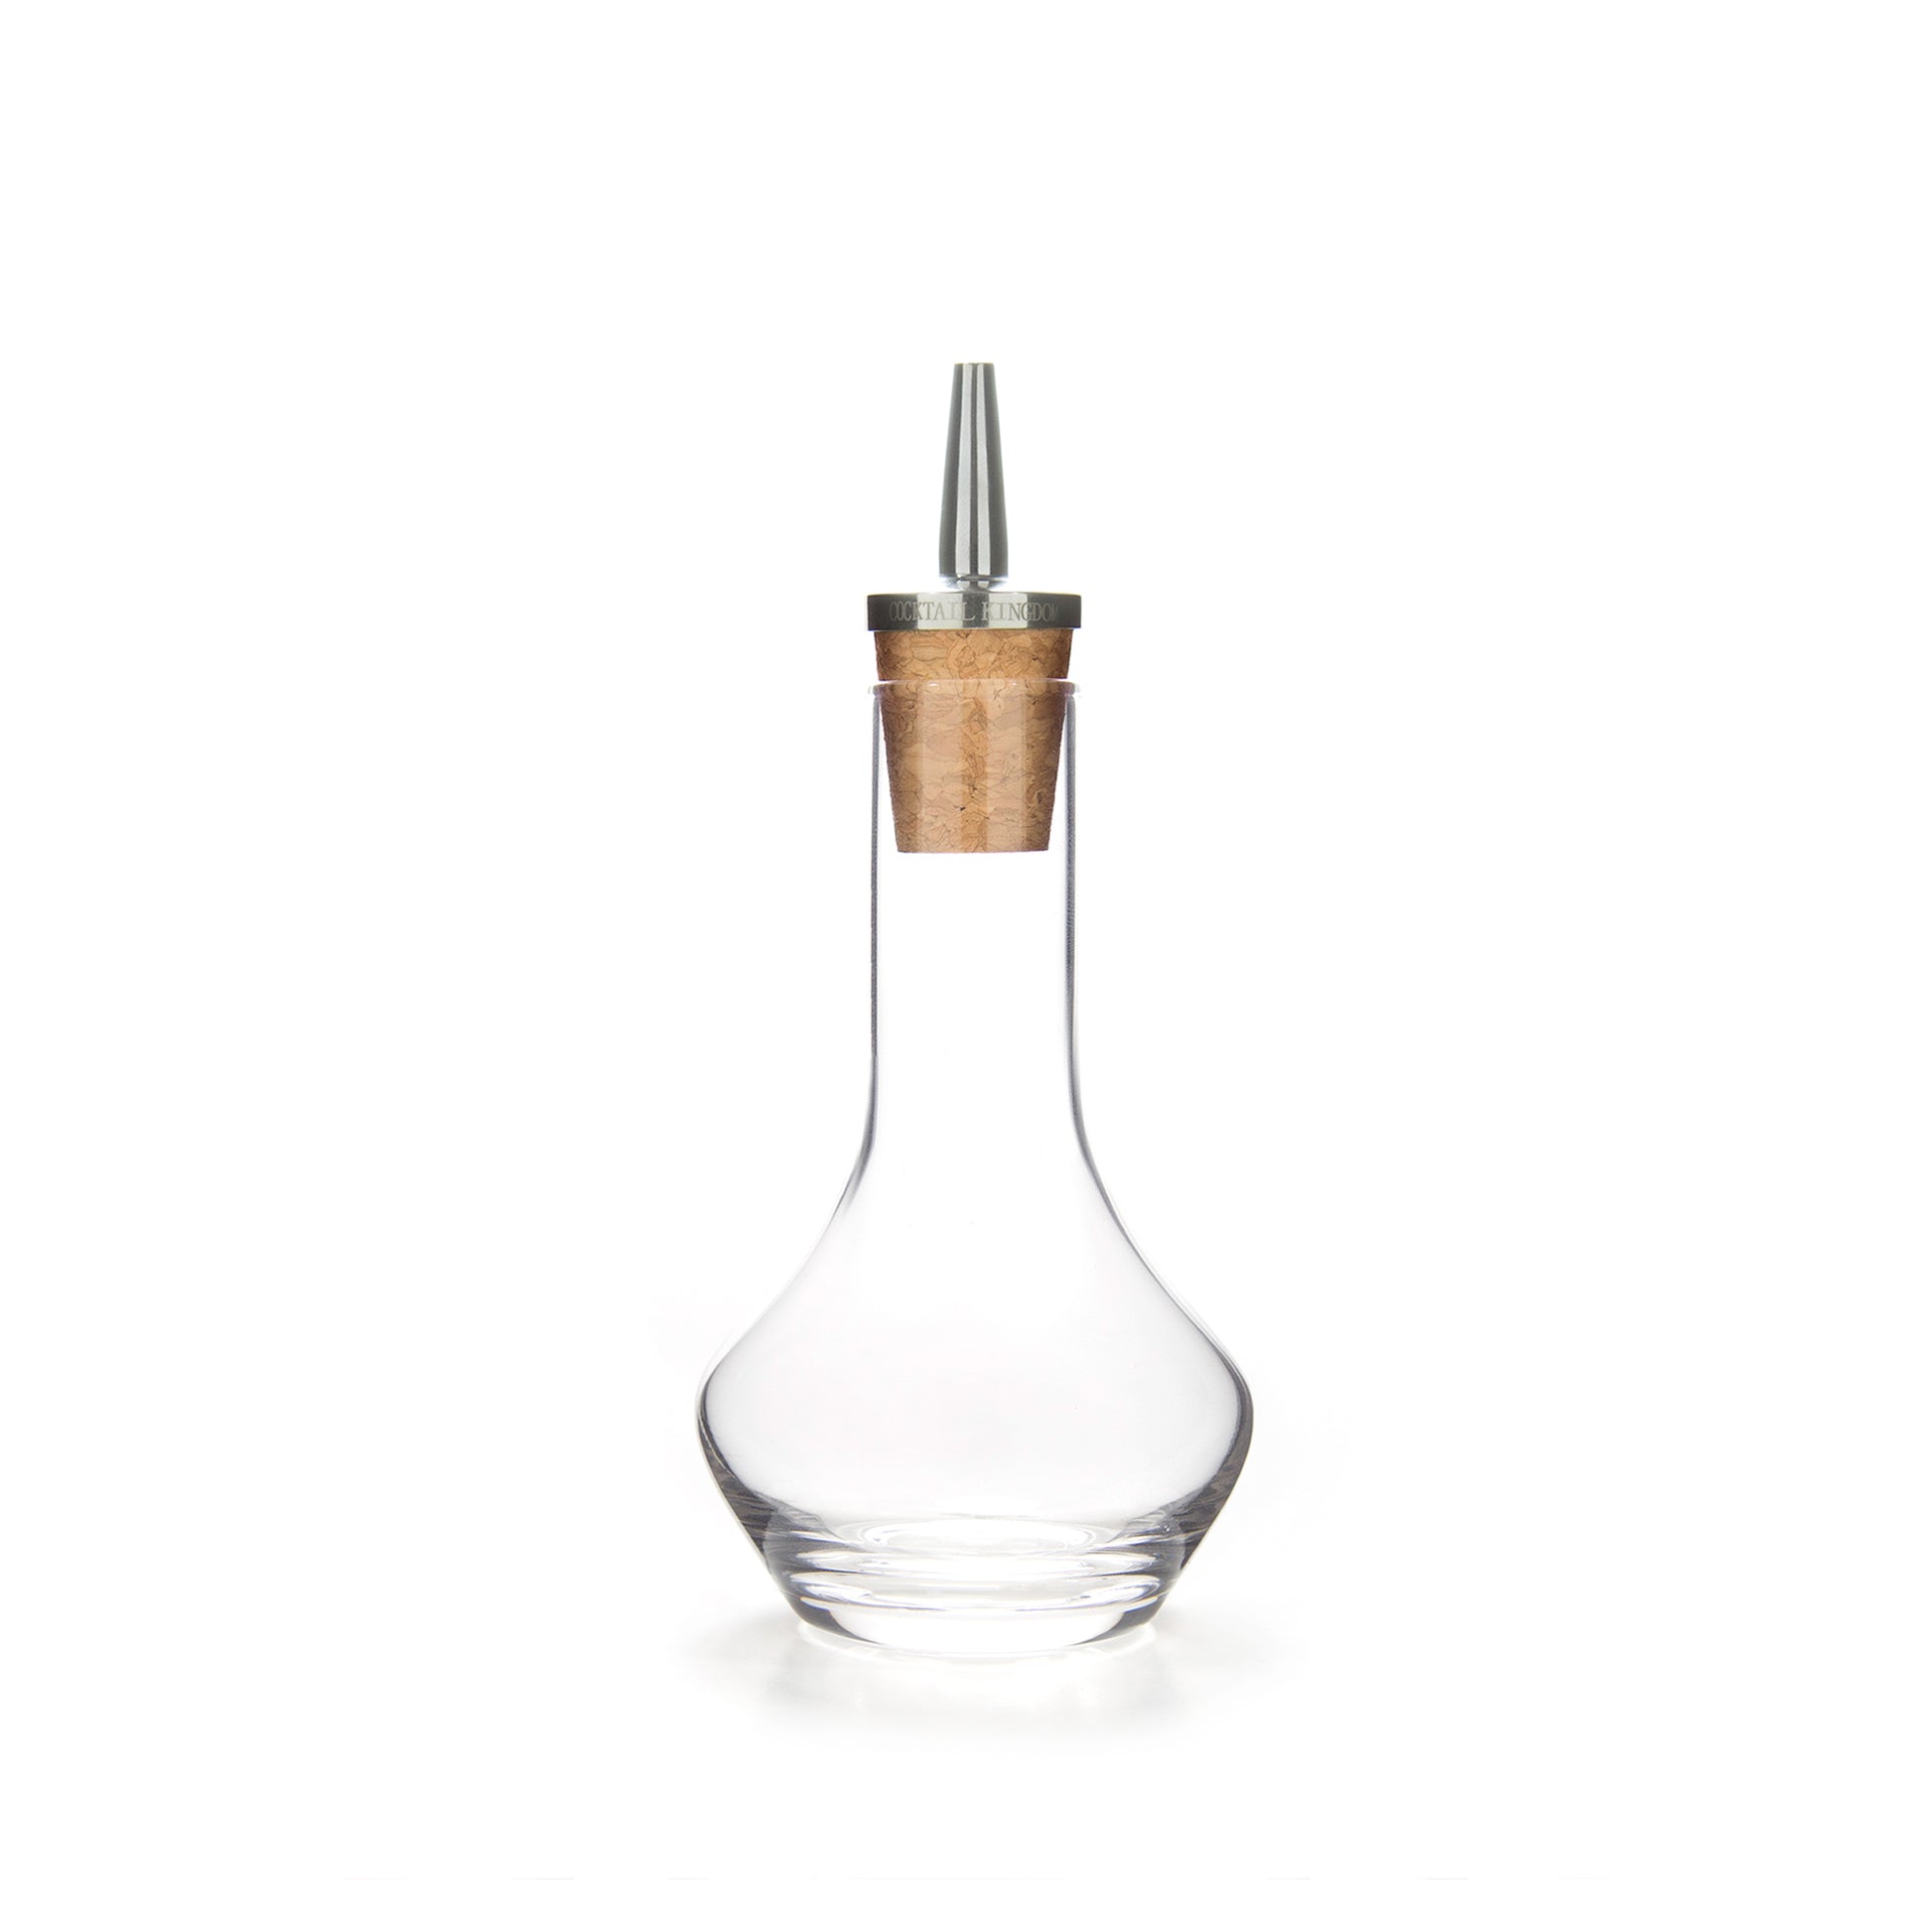 BITTERS BOTTLE – STAINLESS STEEL DASHER TOP / 50ml (1.7oz)